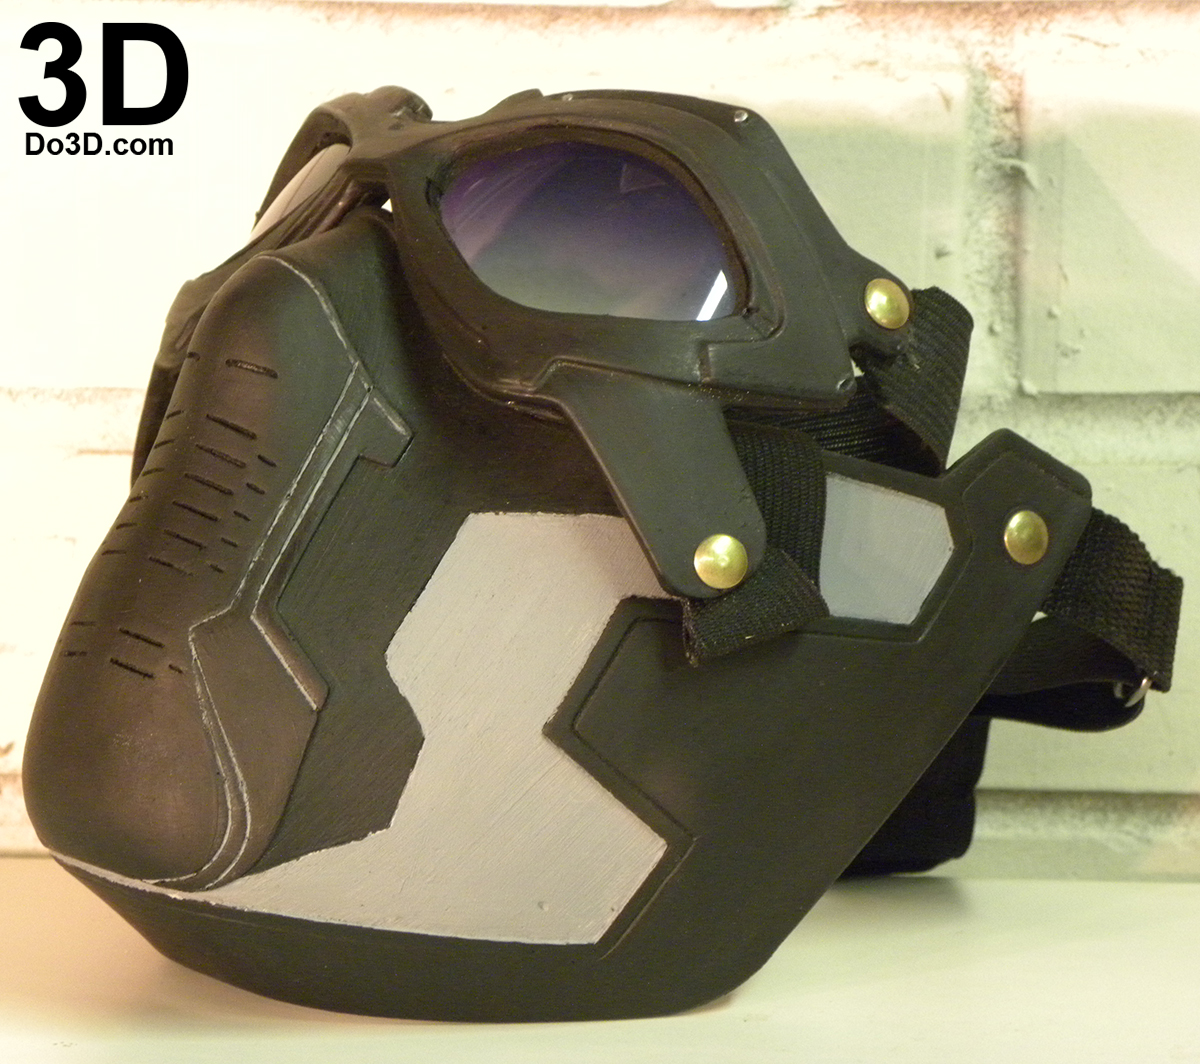 winter-soldier-mouth-cover-piece-mask-goggle-glasses-lens-helmet-3d-printab...